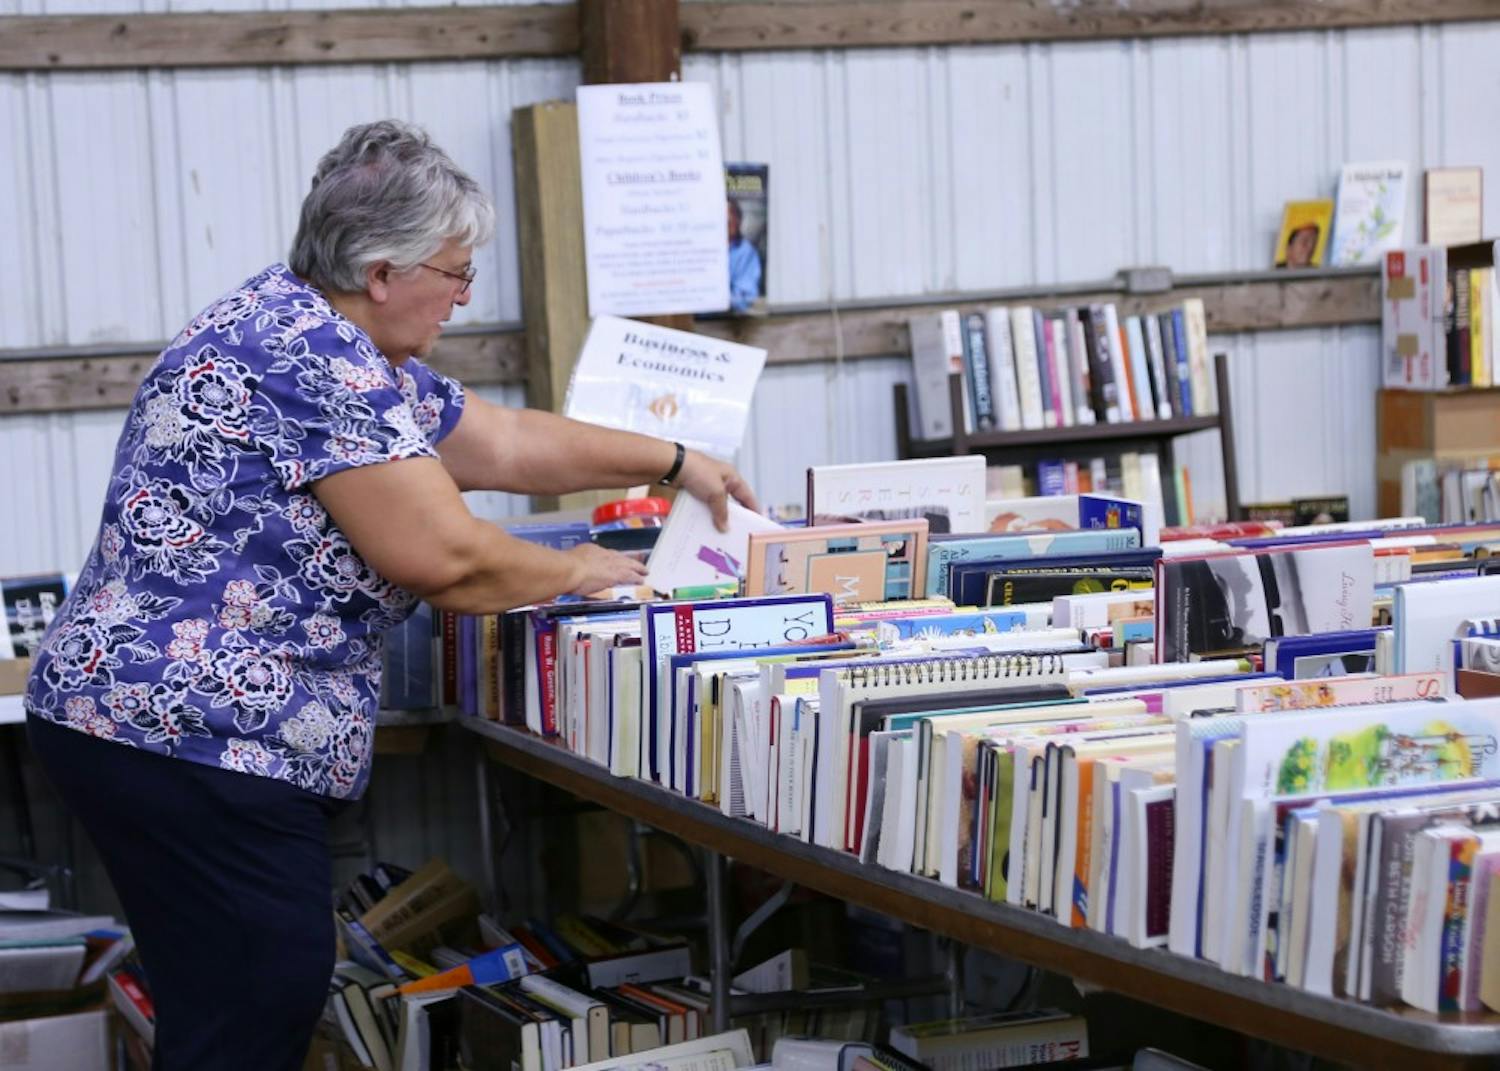 Rullen Fessenbecker searches for books at the Bloomington Community Book Fair, hosted by Hoosier Hills Food Bank. Fessenbecker, who lives in Nashville, Indiana, has visited the book fair more than 10 times.